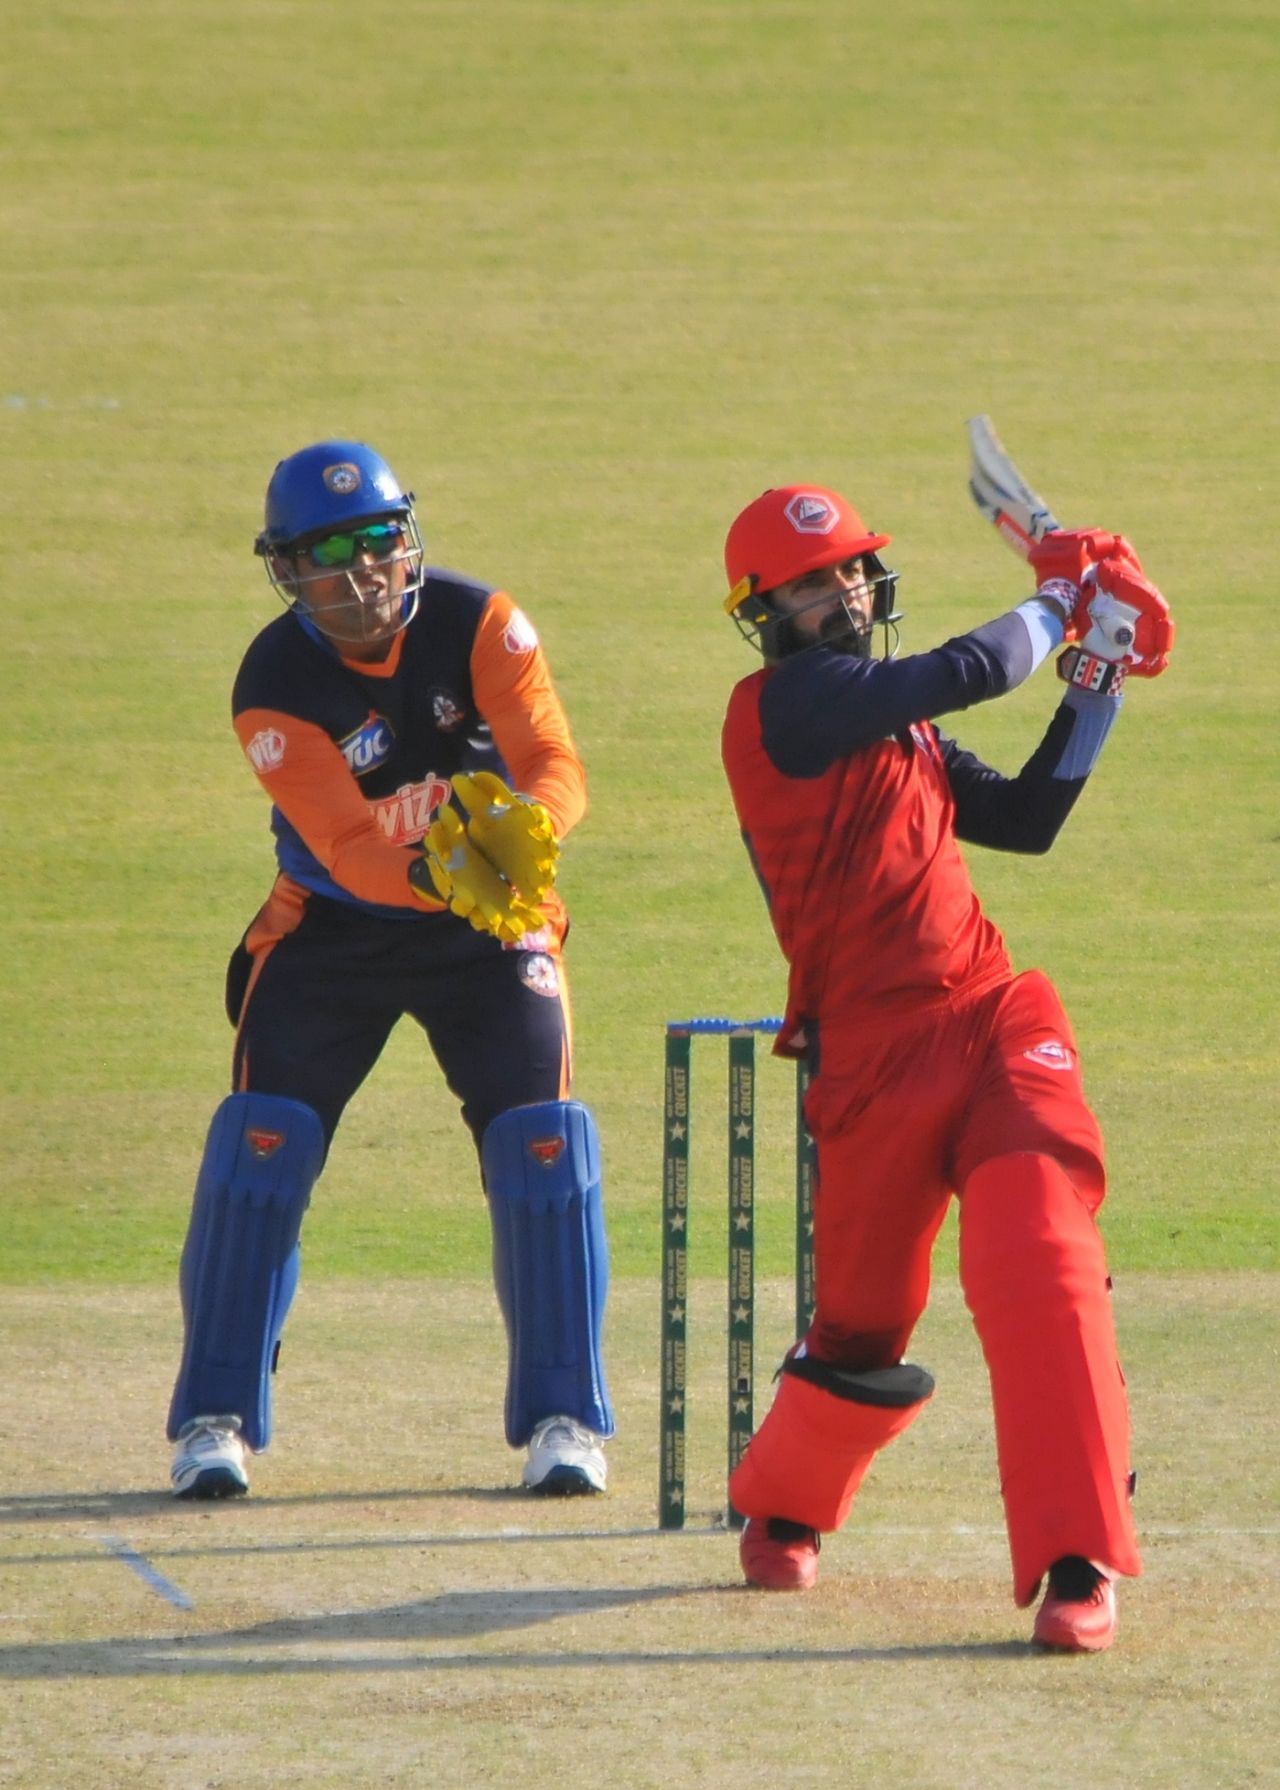 Shadab Khan played a good all-round hand in Northern's win, Northern vs Central Punjab, National T20 Cup, Multan, October 3, 2020